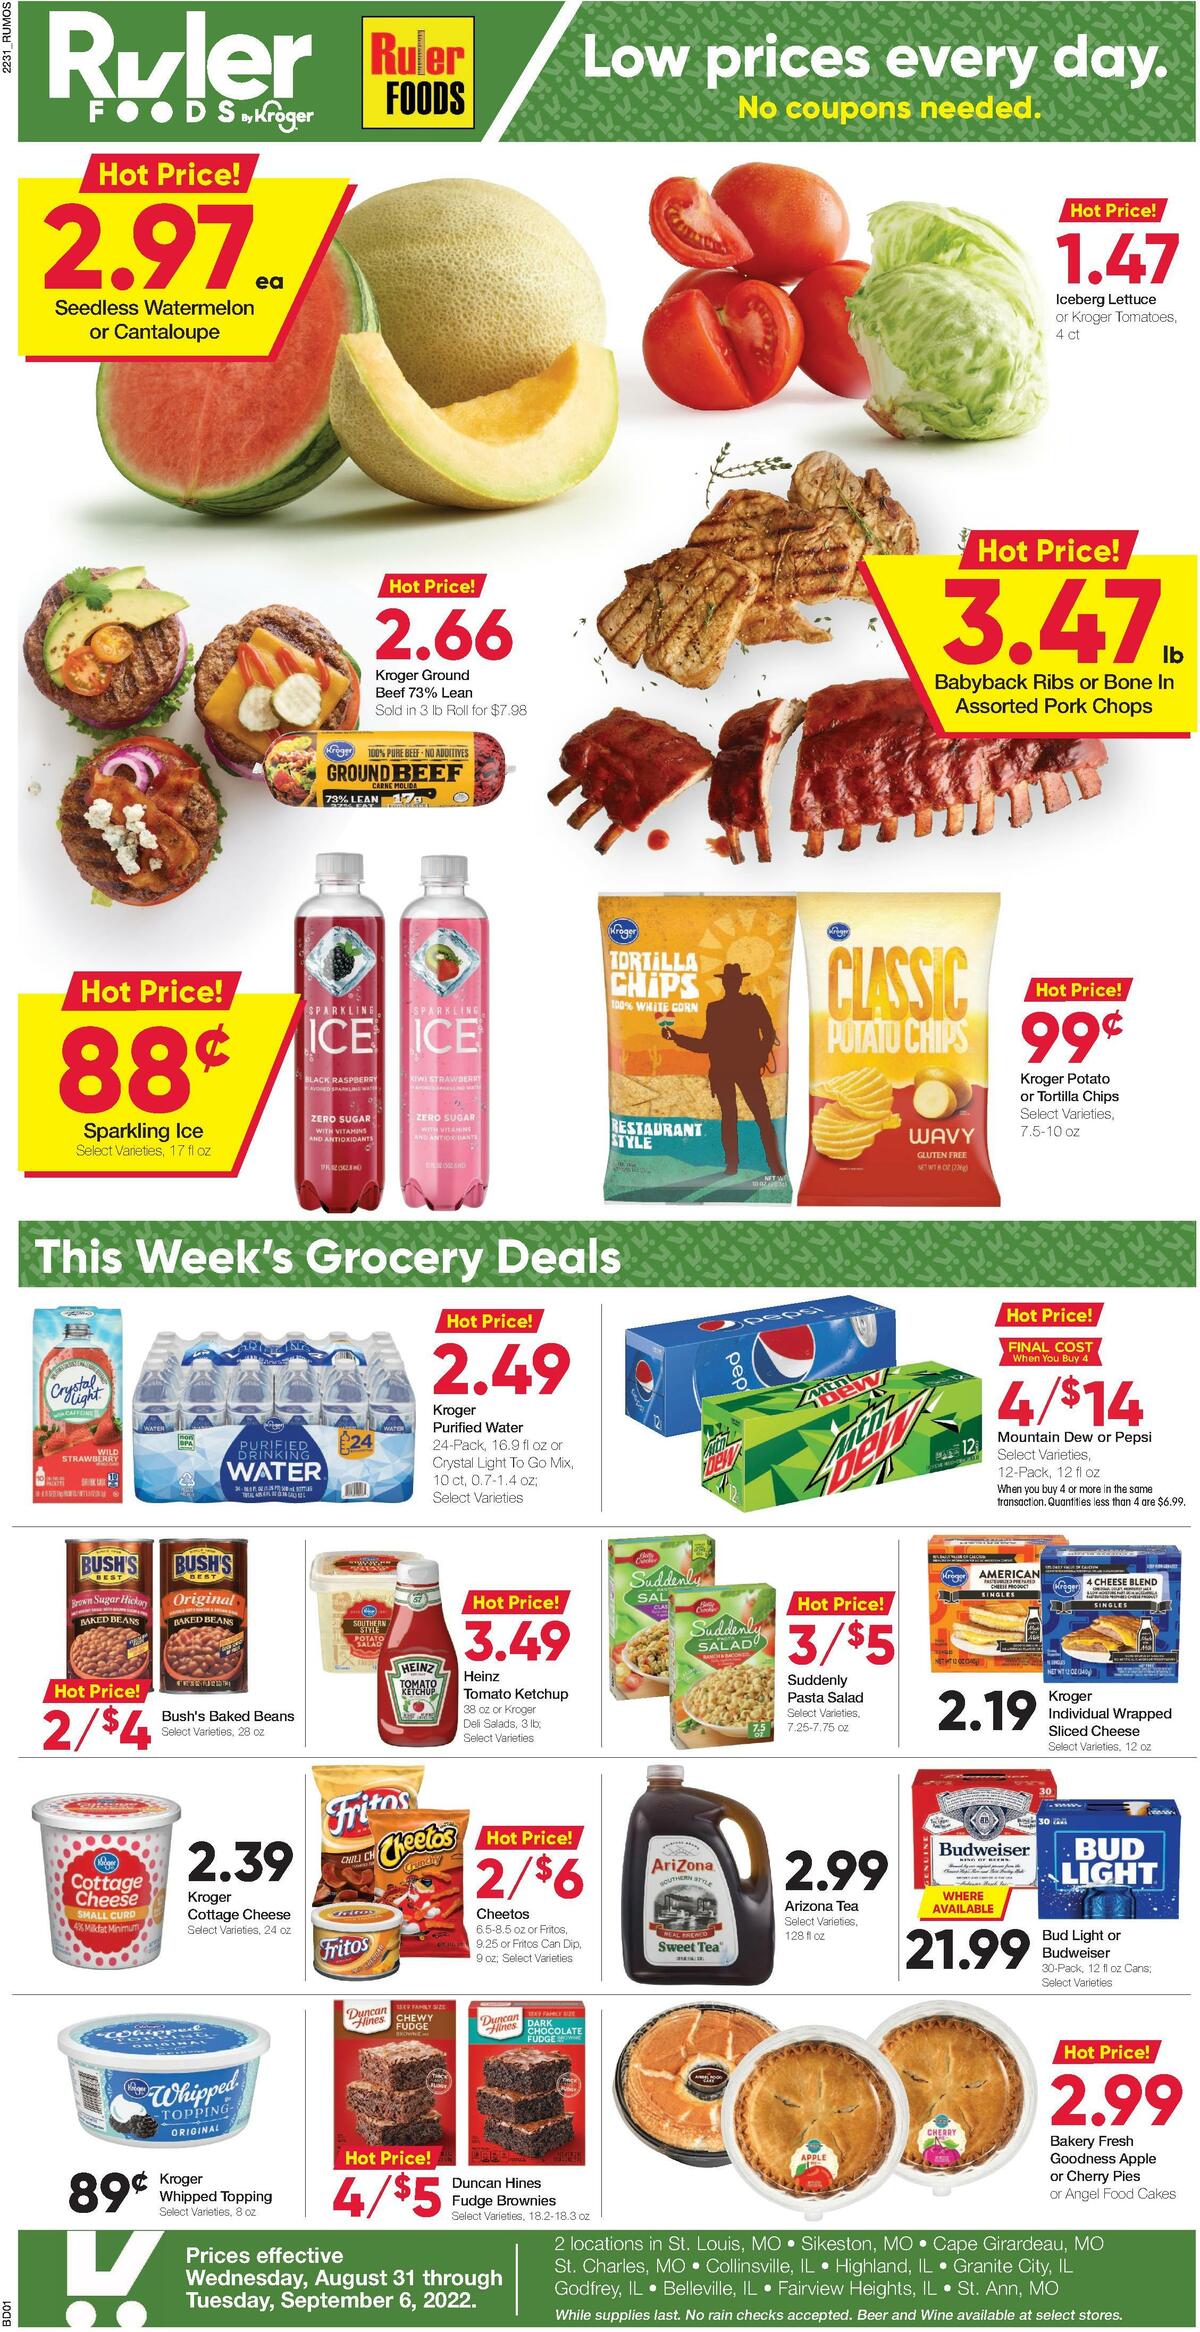 Ruler Foods Weekly Ad from August 31